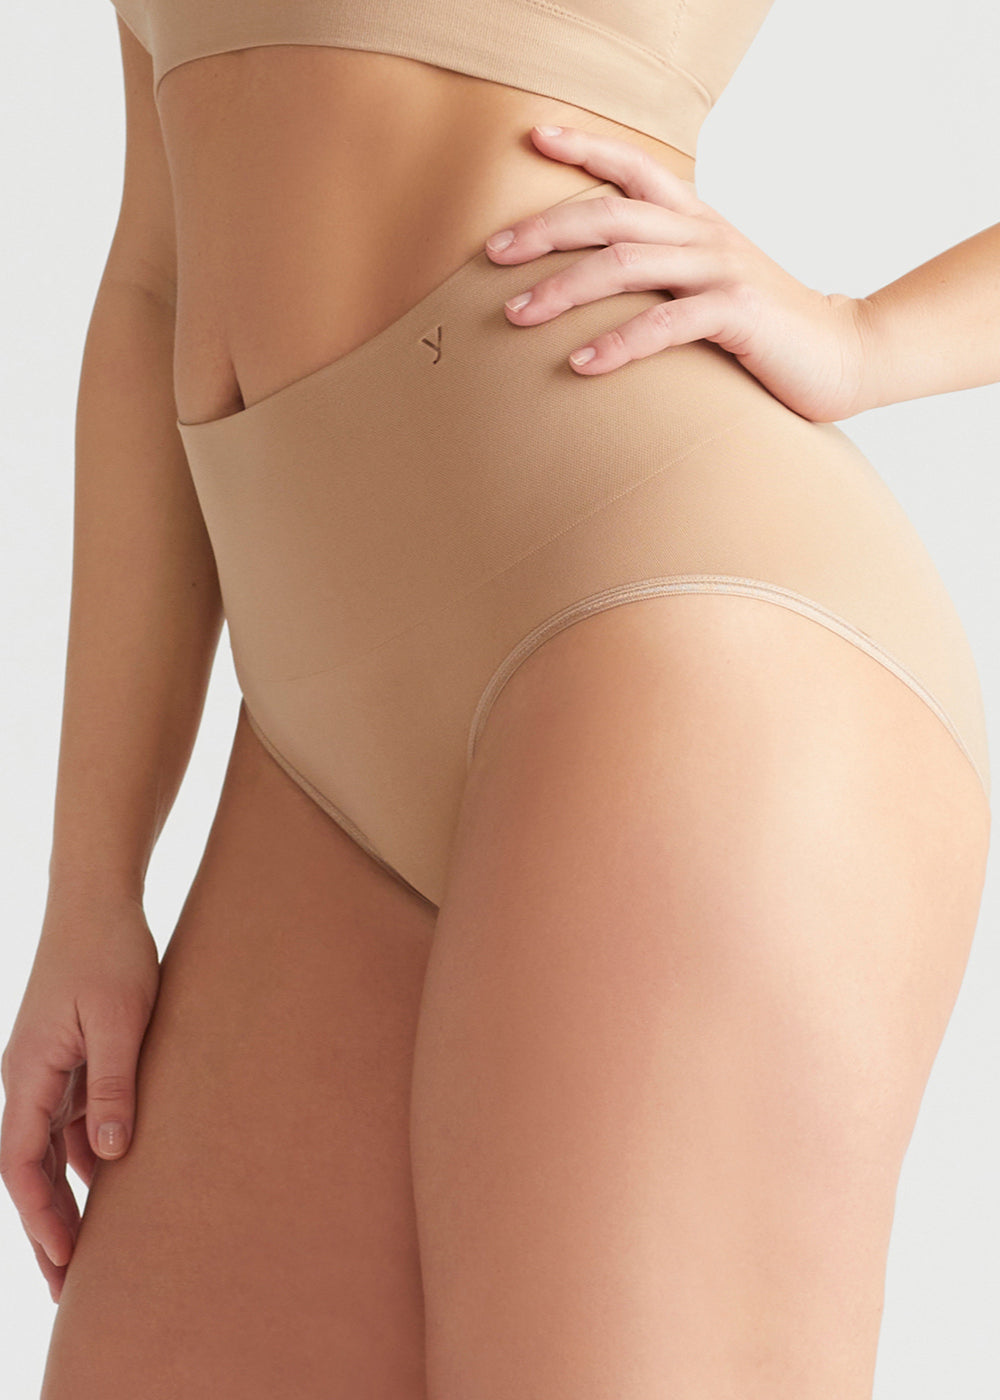 Ultralight Shaping Brief - Seamless from Yummie in Almond  - 1